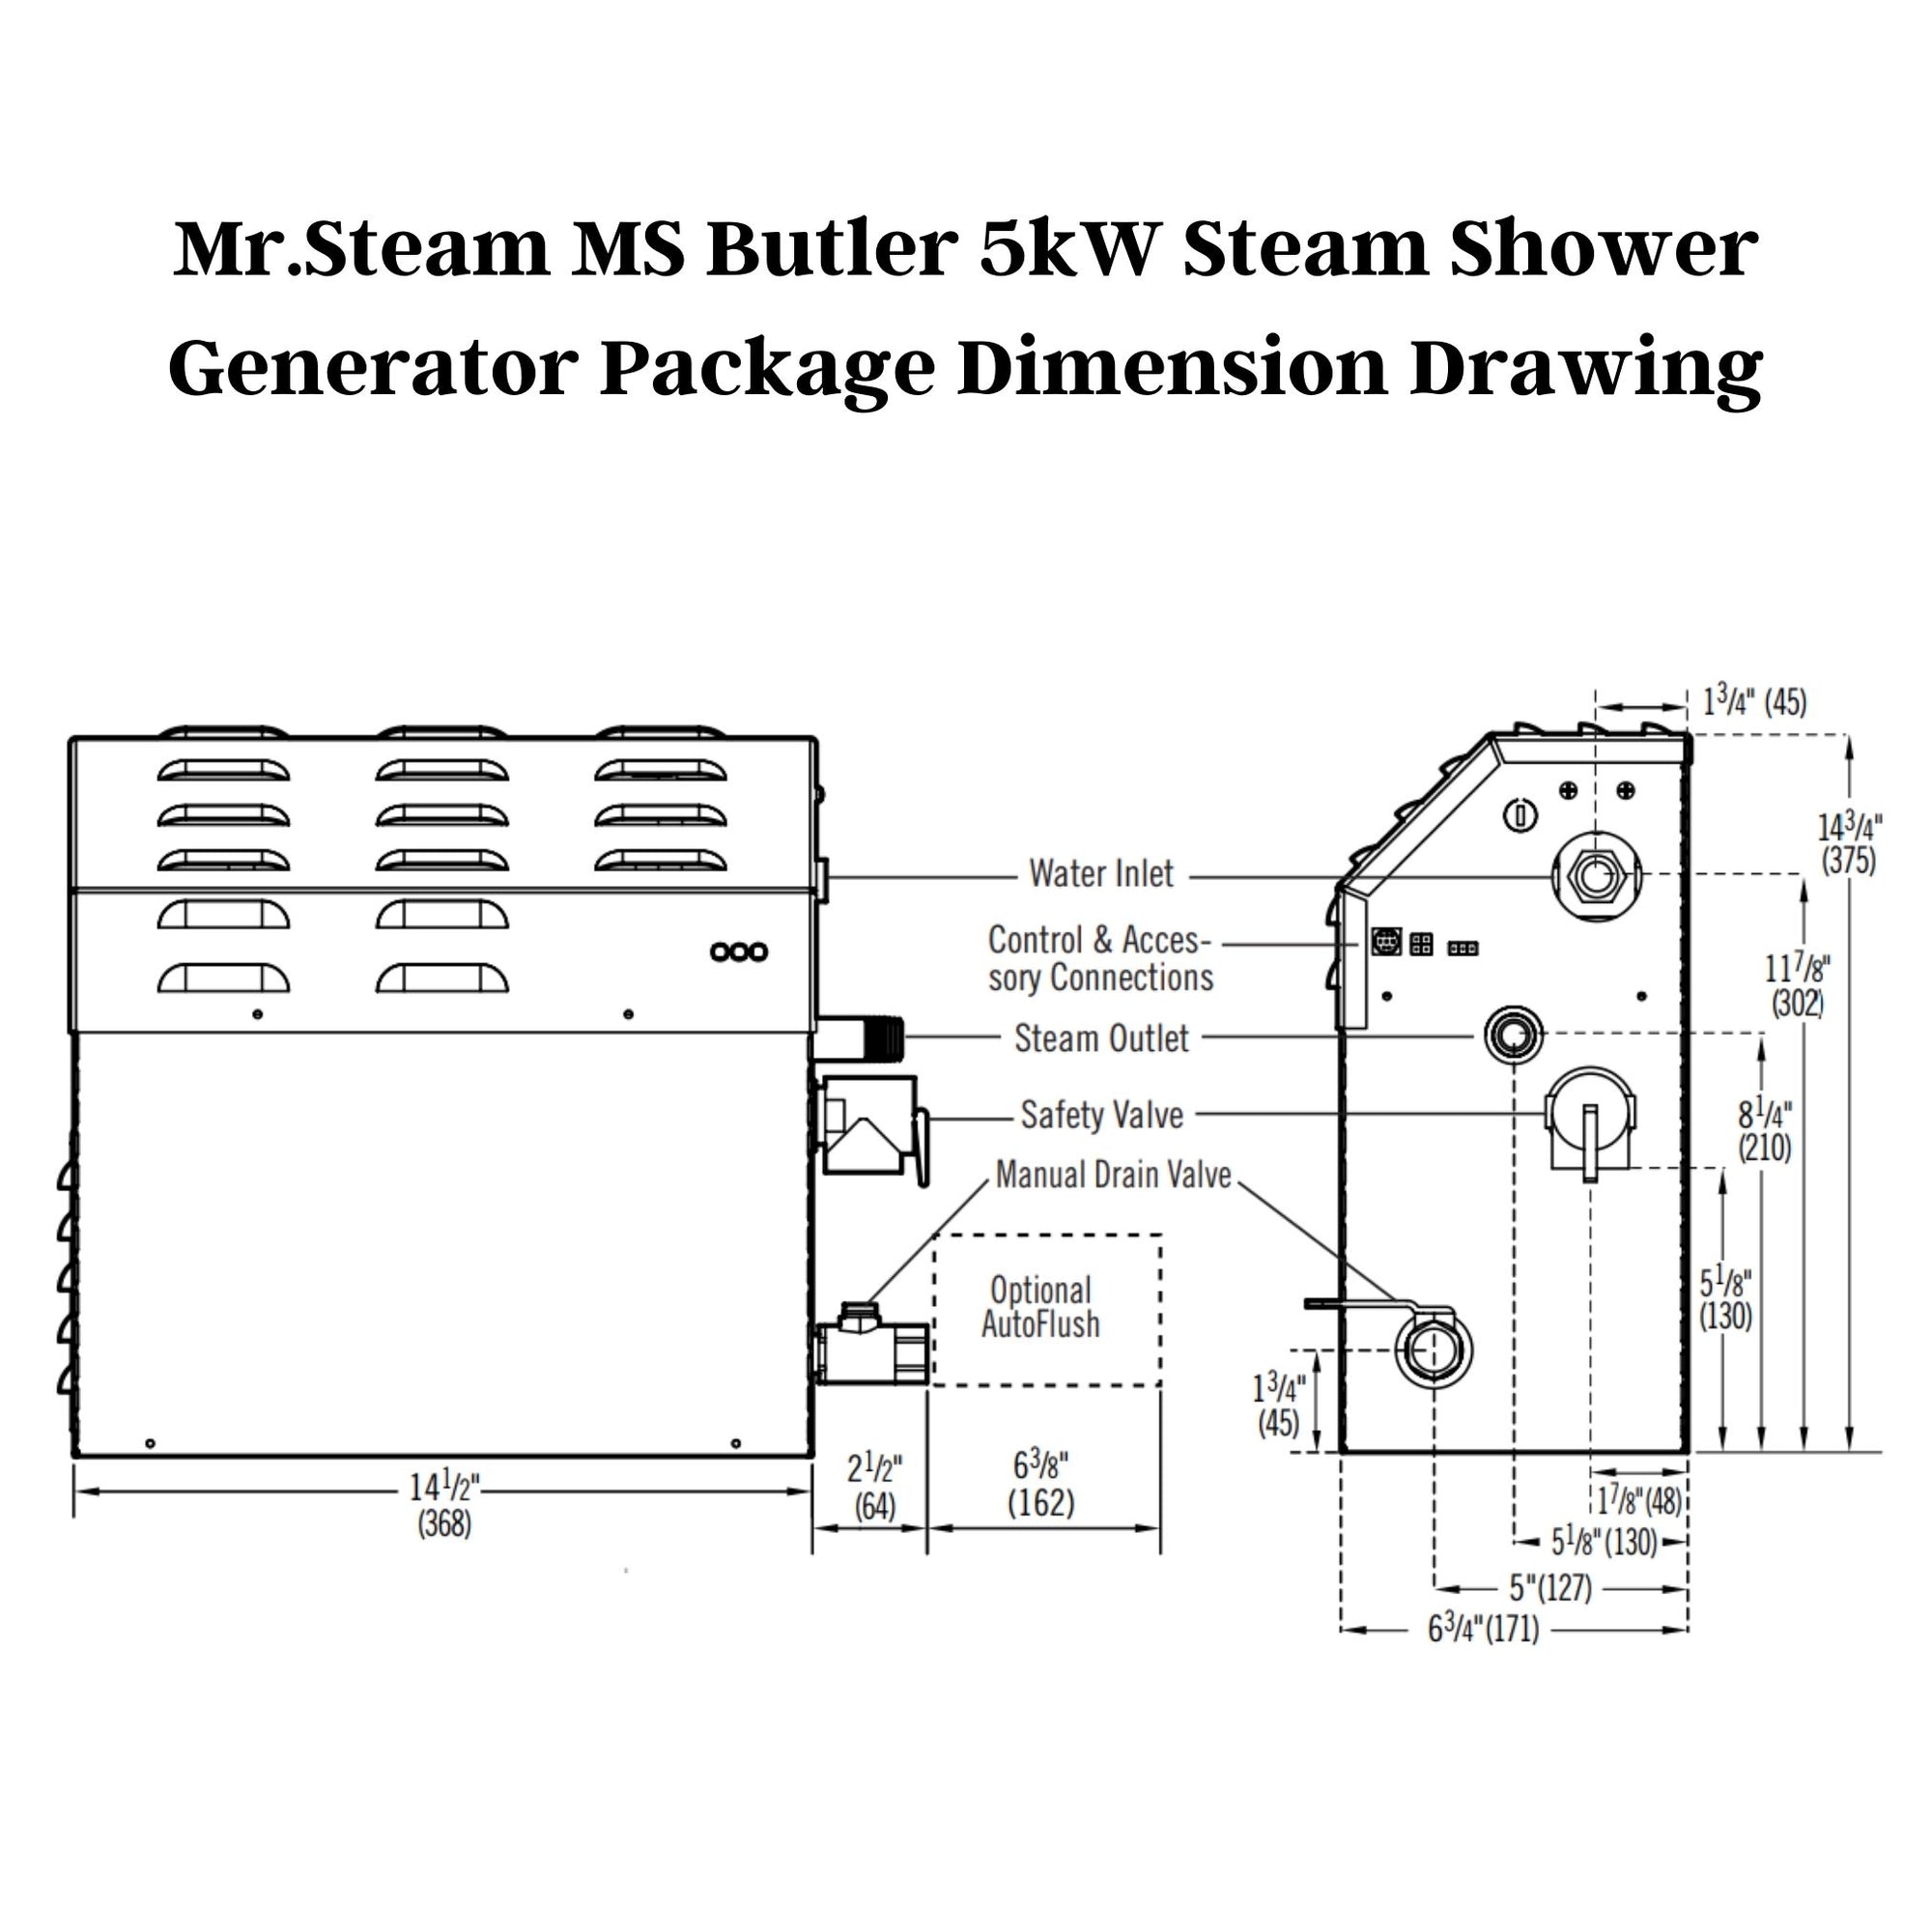 Mr. Steam 5kW MS (Butler) Steam Shower Generator Package with iTempoPlus Control in Round Brushed Nickel 05C1ACB0000